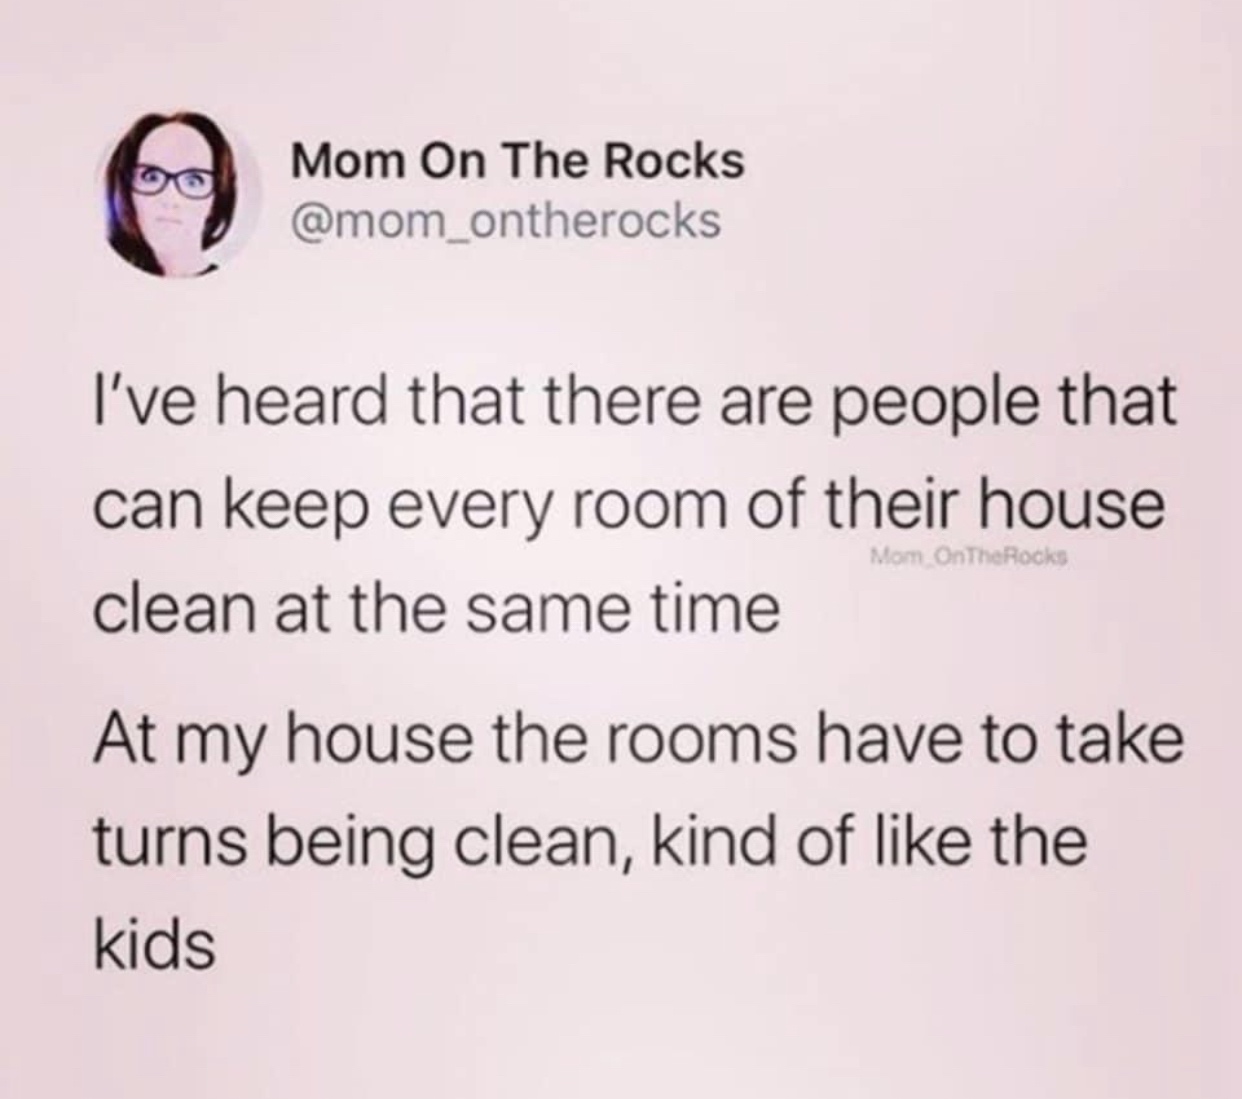 trust quotes - Mom On The Rocks Mom OnTheRooks I've heard that there are people that can keep every room of their house clean at the same time At my house the rooms have to take turns being clean, kind of the kids